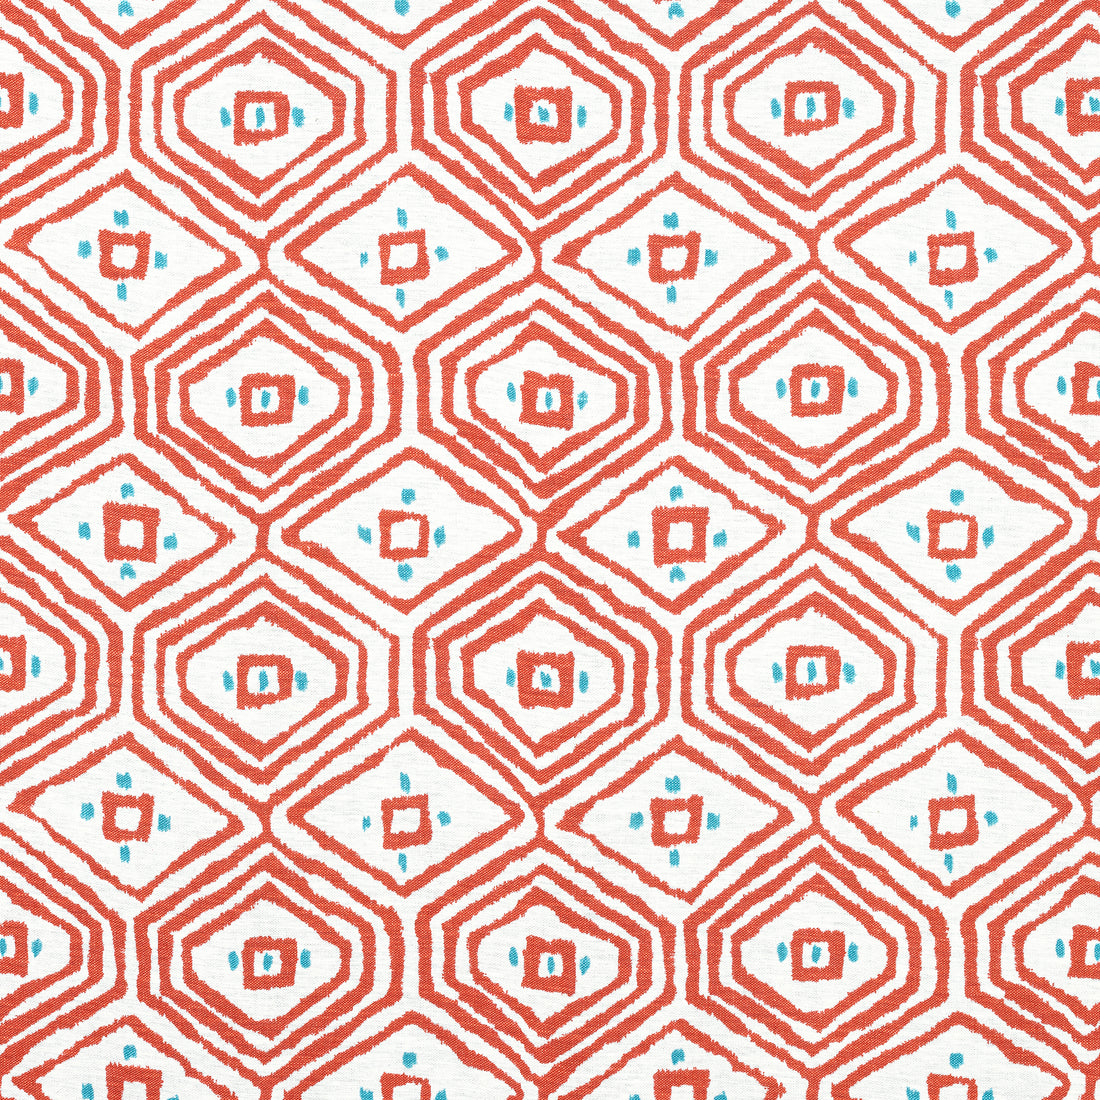 Pass-A-Grille fabric in coral color - pattern number F910619 - by Thibaut in the Ceylon collection